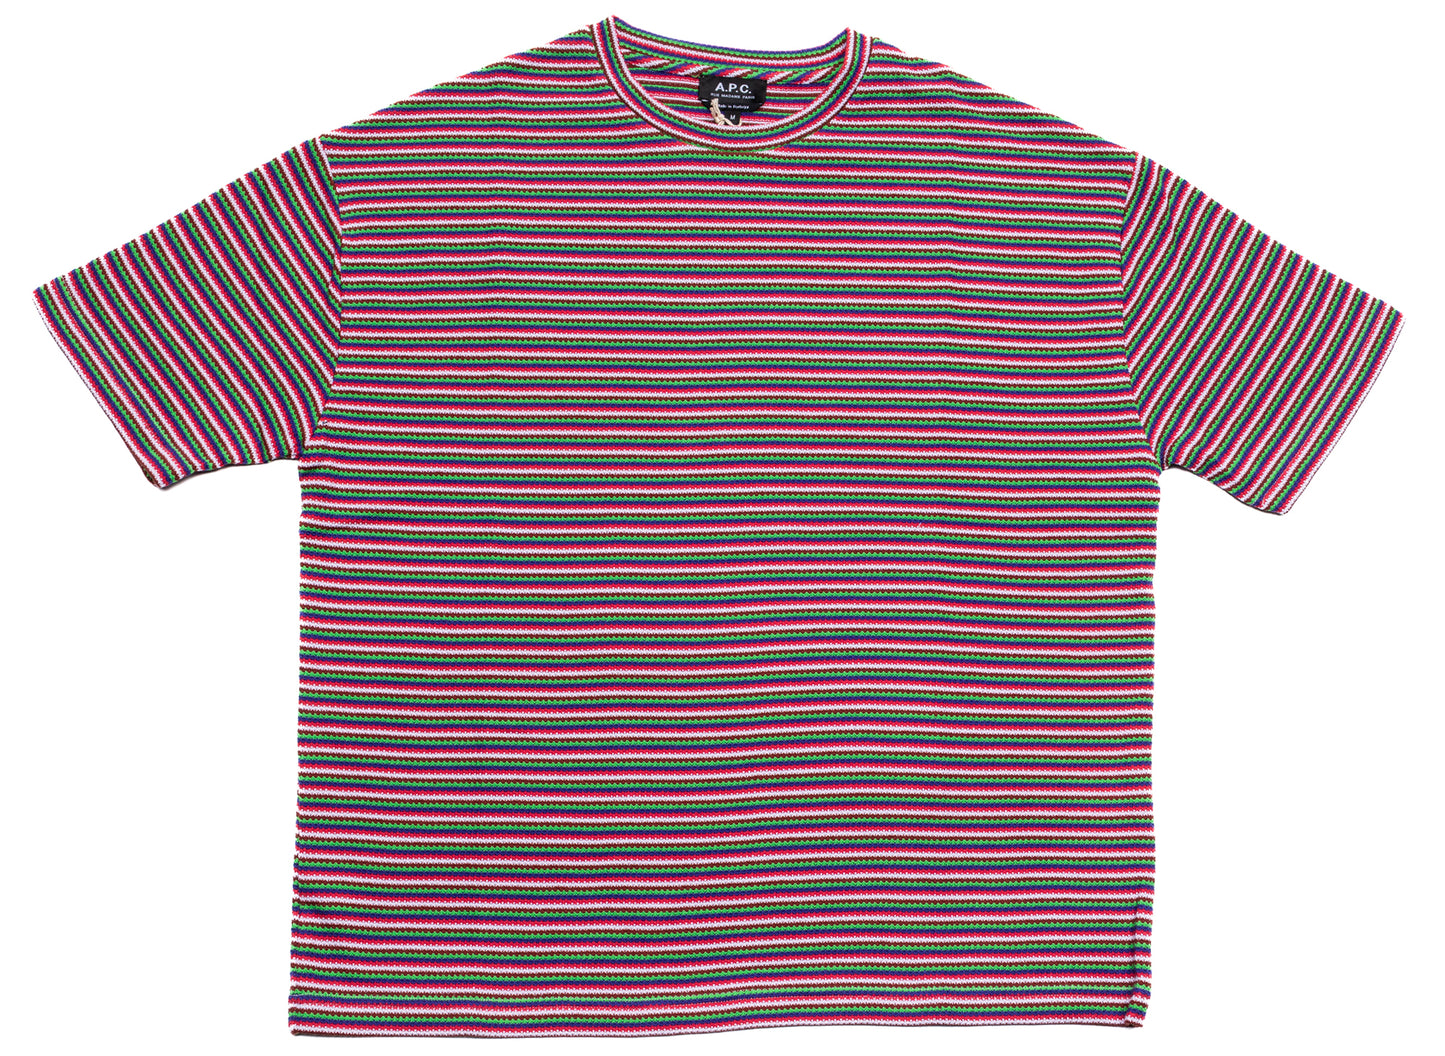 A.P.C. Bahia T-Shirt in Pink